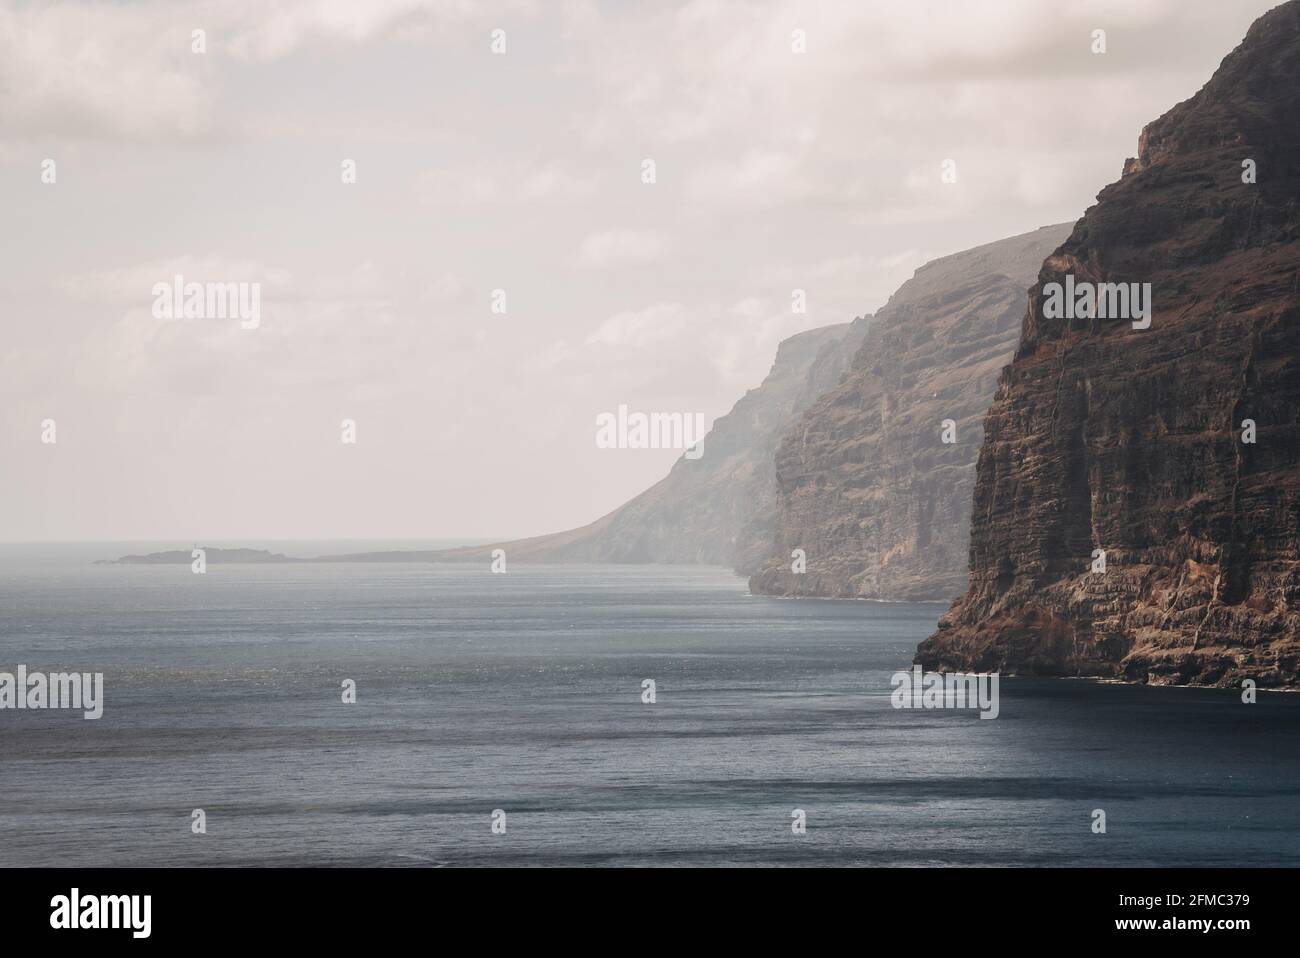 Photo of the cliffs at the Los Gigantes coast in the southern region of the island of Tenerife (Canary Islands, Europe) Stock Photo